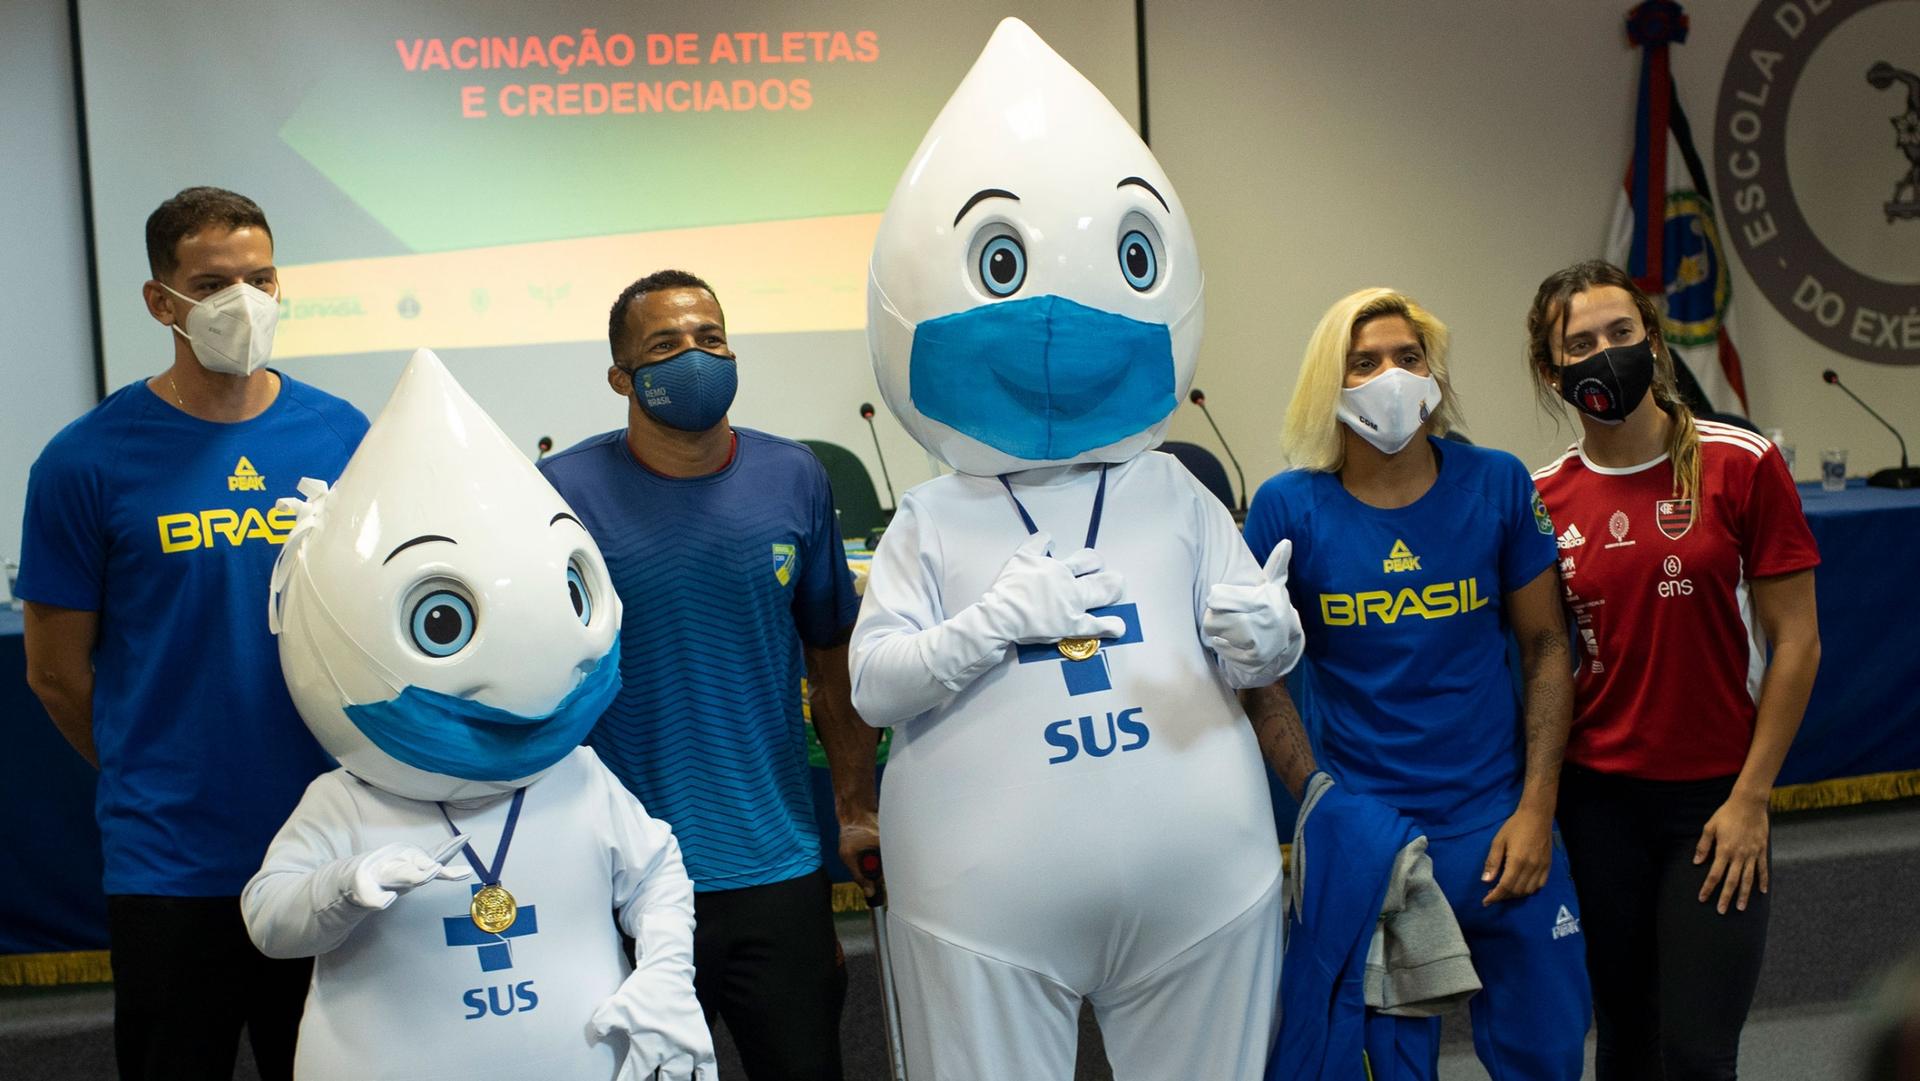 Olympic athletes, from left, archer Marcus Vinicius D'Almeida, Paralympic rower Michel Pessanha, swimmer Marcela Cunha and swimmer Larissa Oliveira pose for a photo with the mascot of the vaccination campaign, named "Zé Gotinha," or "Droplet Joe," after t